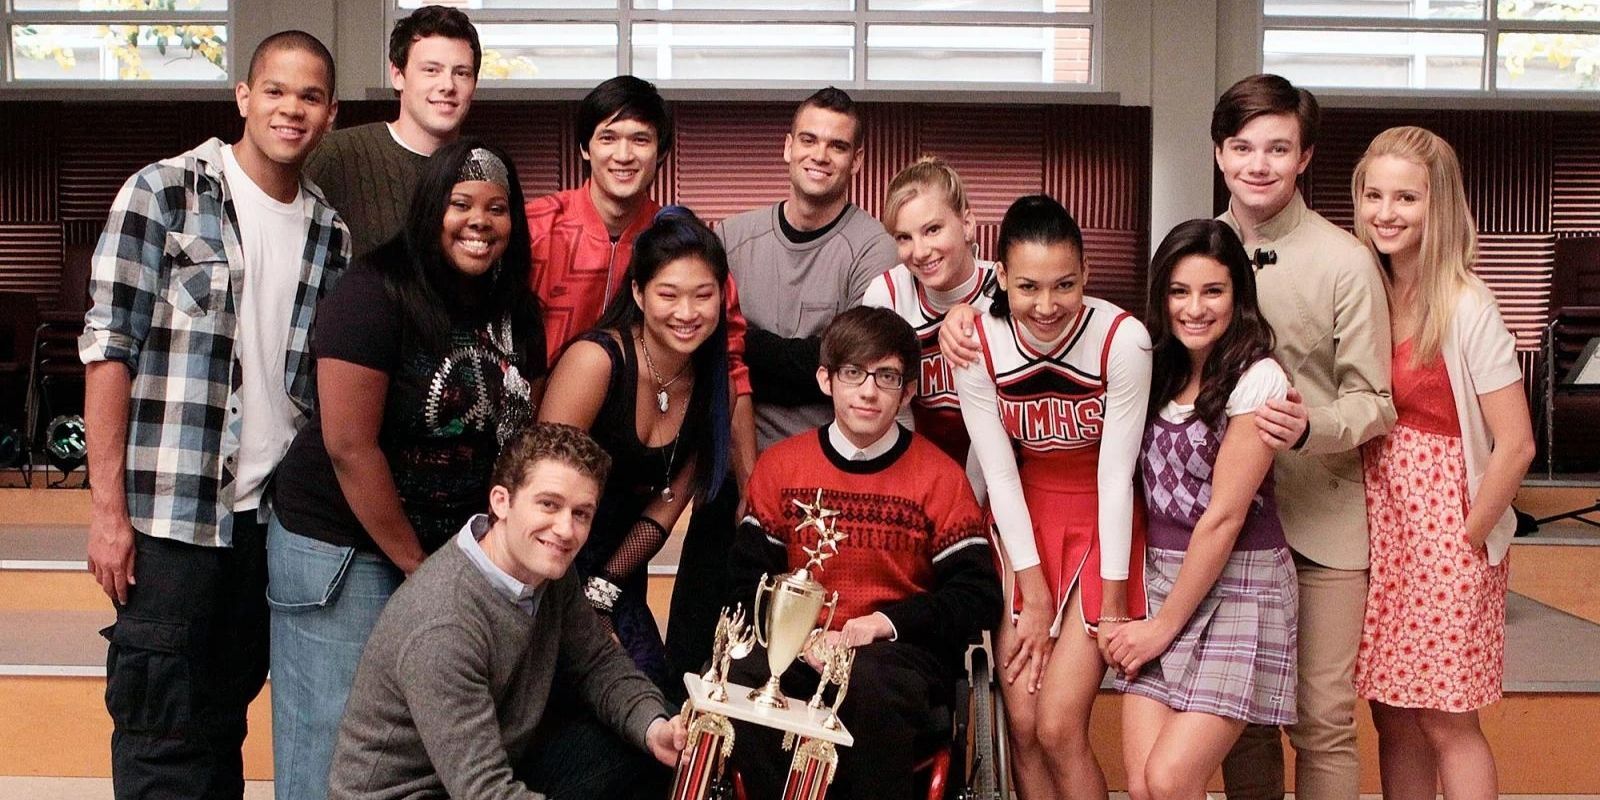 The Glee Club posing with their Sectionals trophy on Glee.